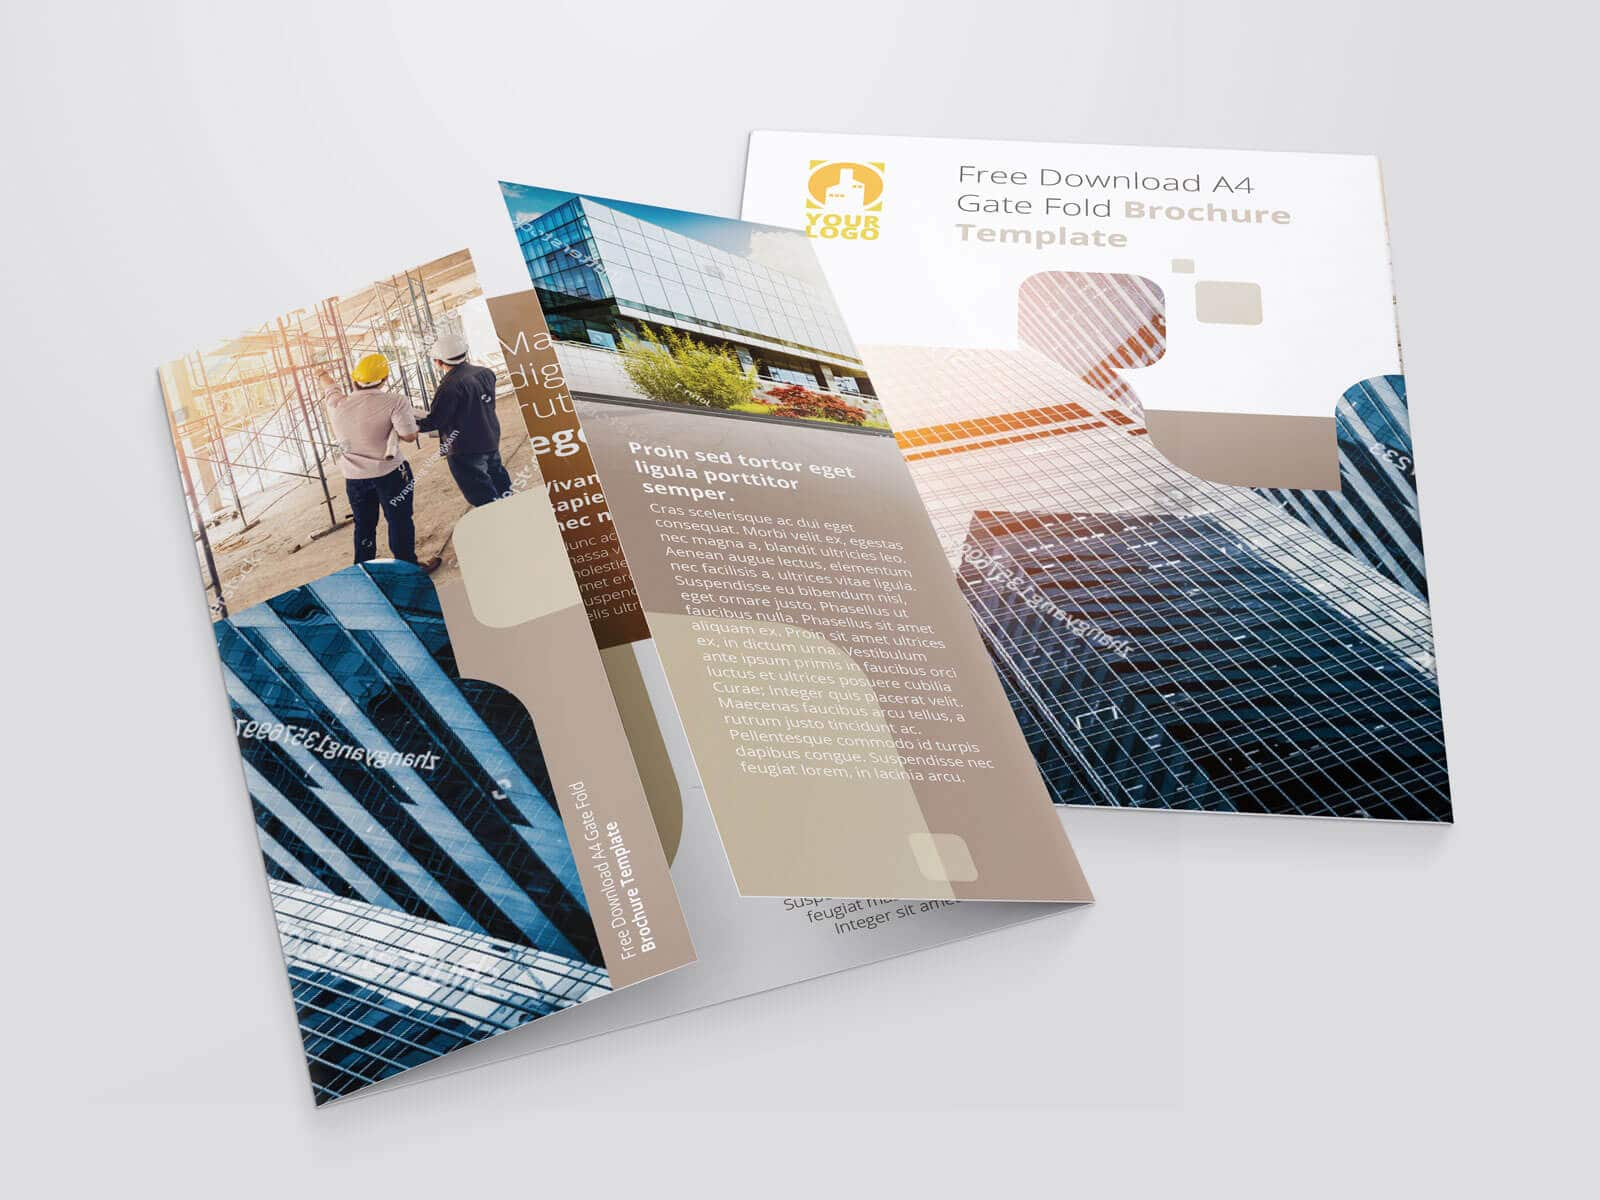 Free Download A10 Gate Fold Brochure Template – Vectogravic Design For Gate Fold Brochure Template